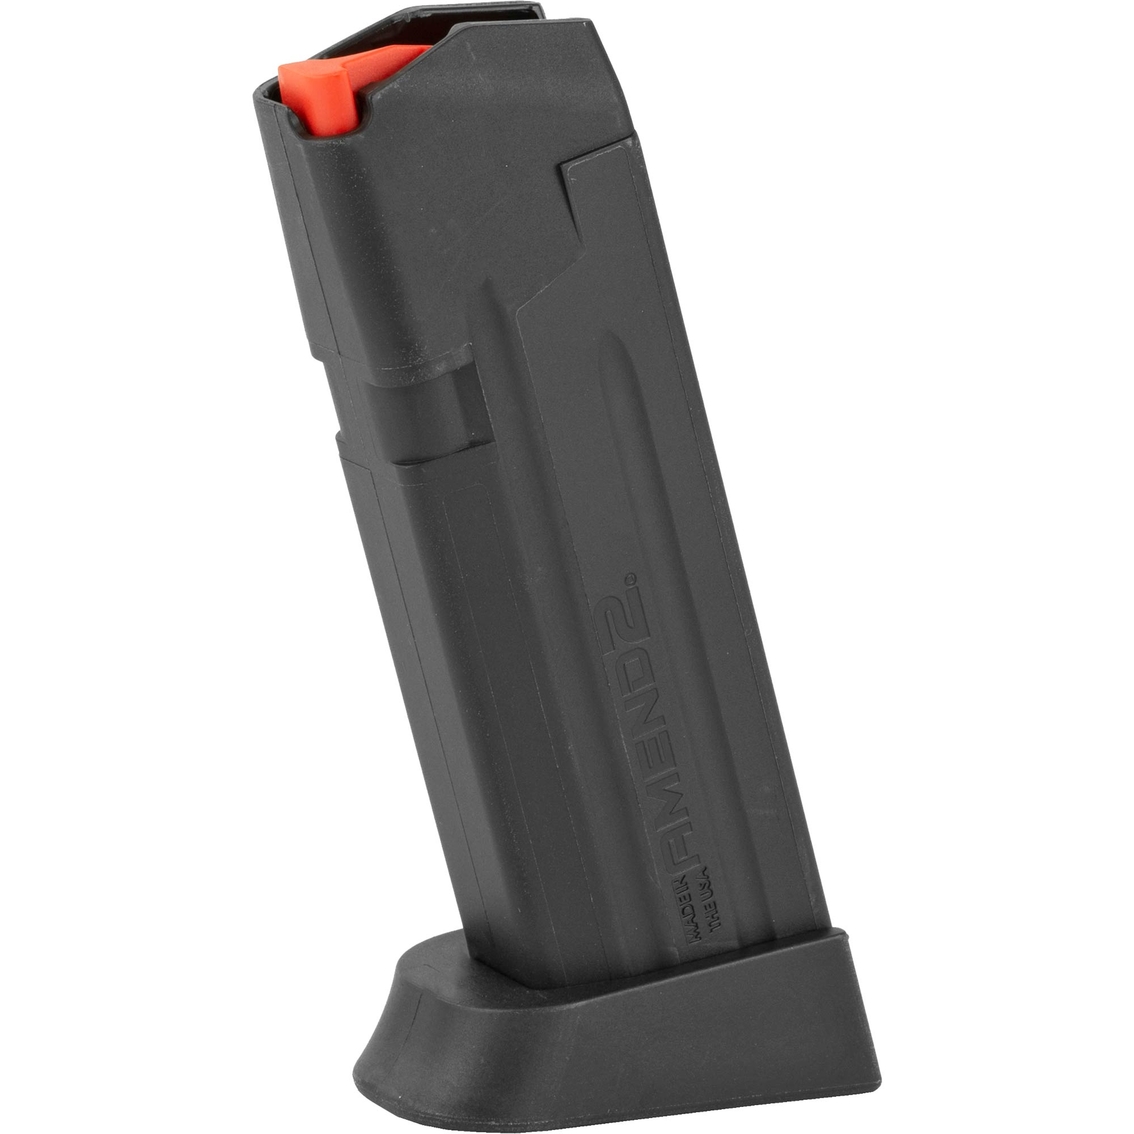 Amend2 Magazine 9MM Fits Glock 19 15 Rounds Black - Image 2 of 2